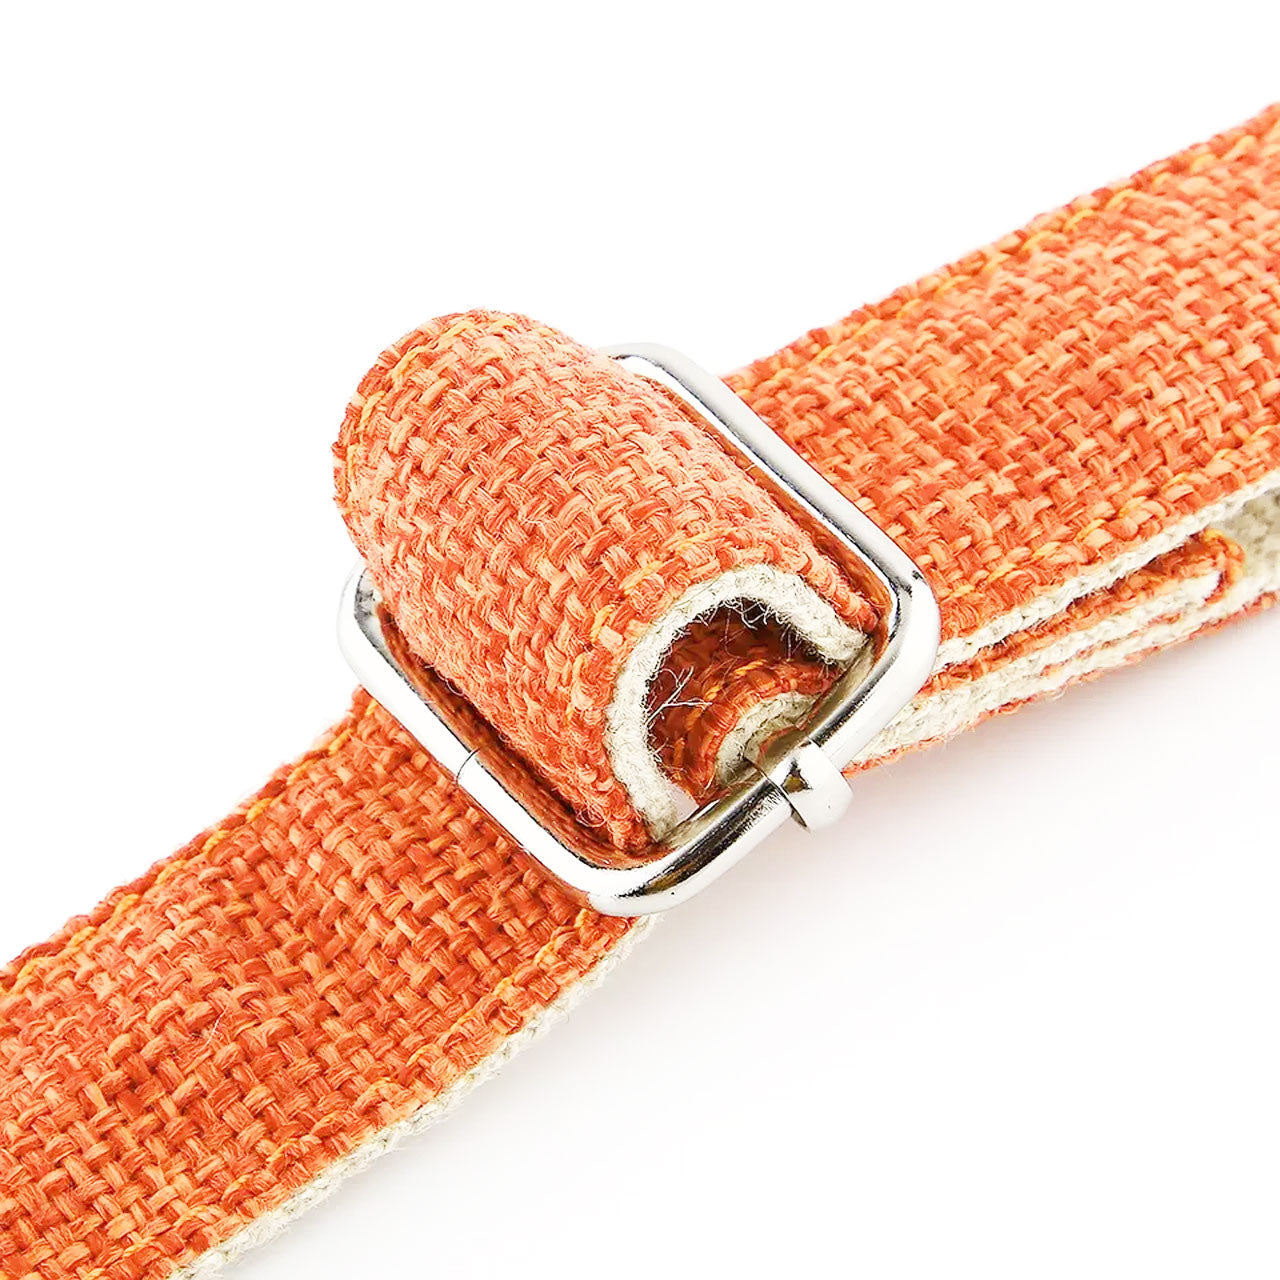 Close up of Organic Hemp & Cotton Dog Collar - orange burst shows the durable webbing of the organic hemp and cotton blend and the premium quality of the metal D ring